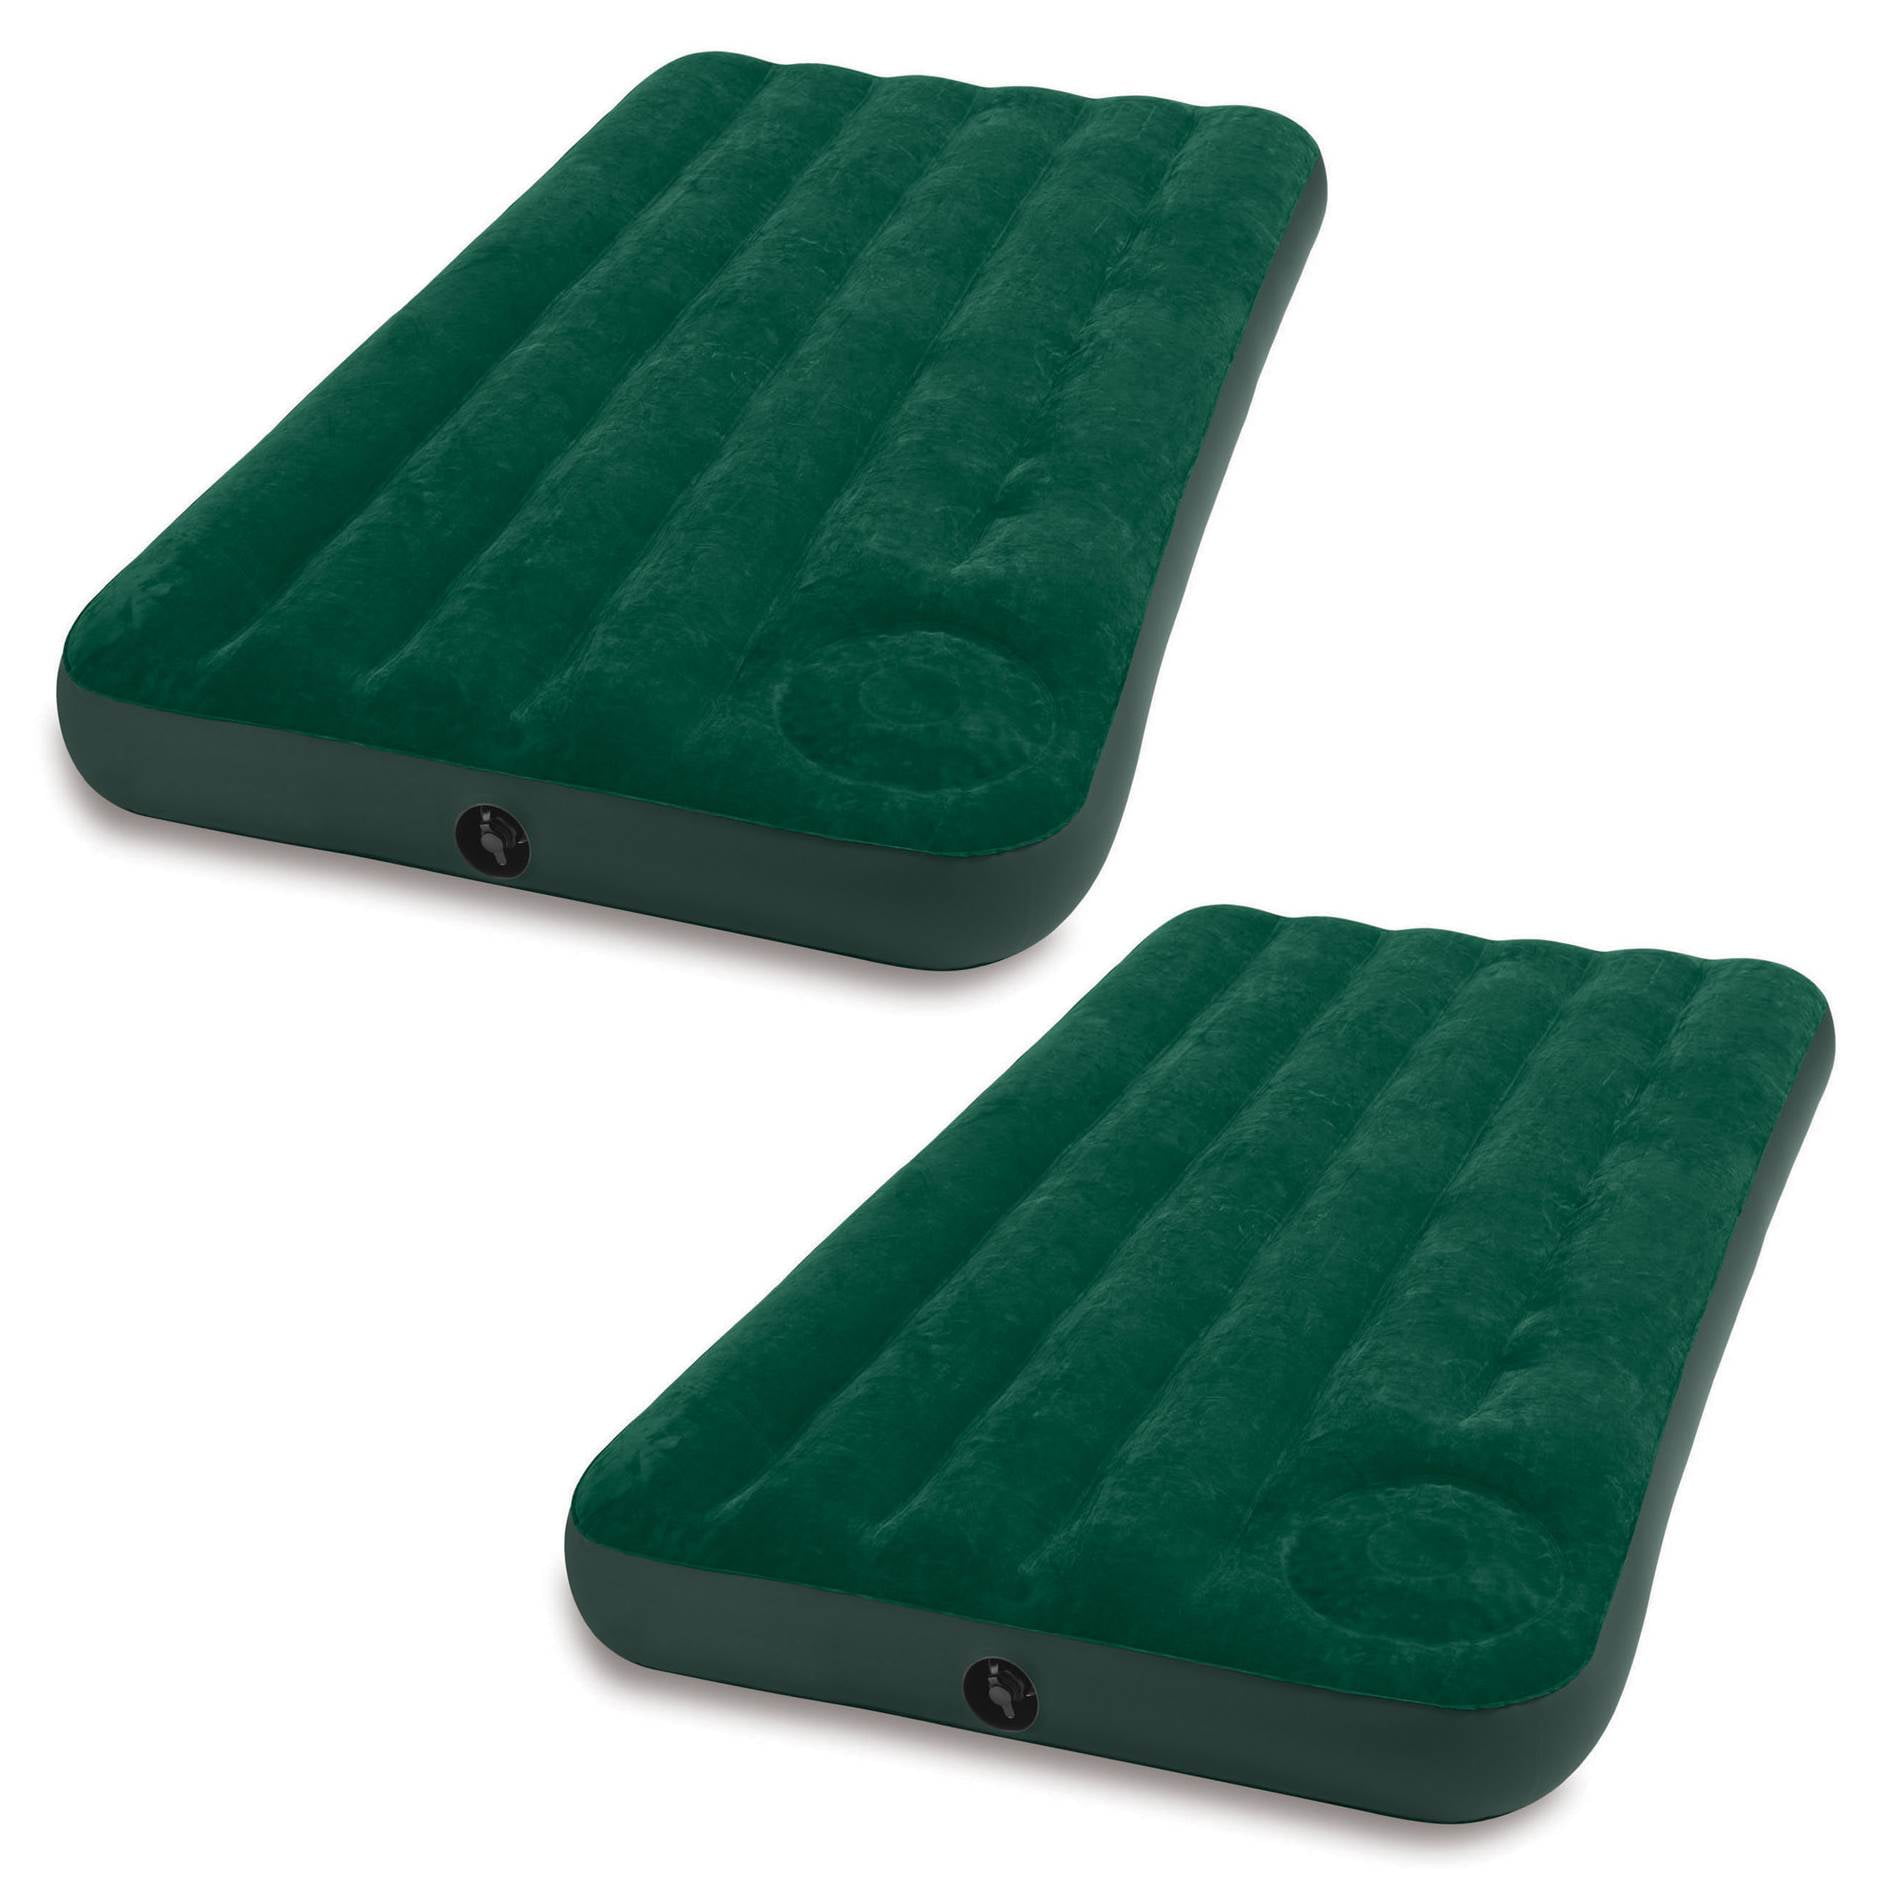 Twin Single Double Air Mattress Bed INTEX Downy Camping Indoor Outdoor Foot Pump 